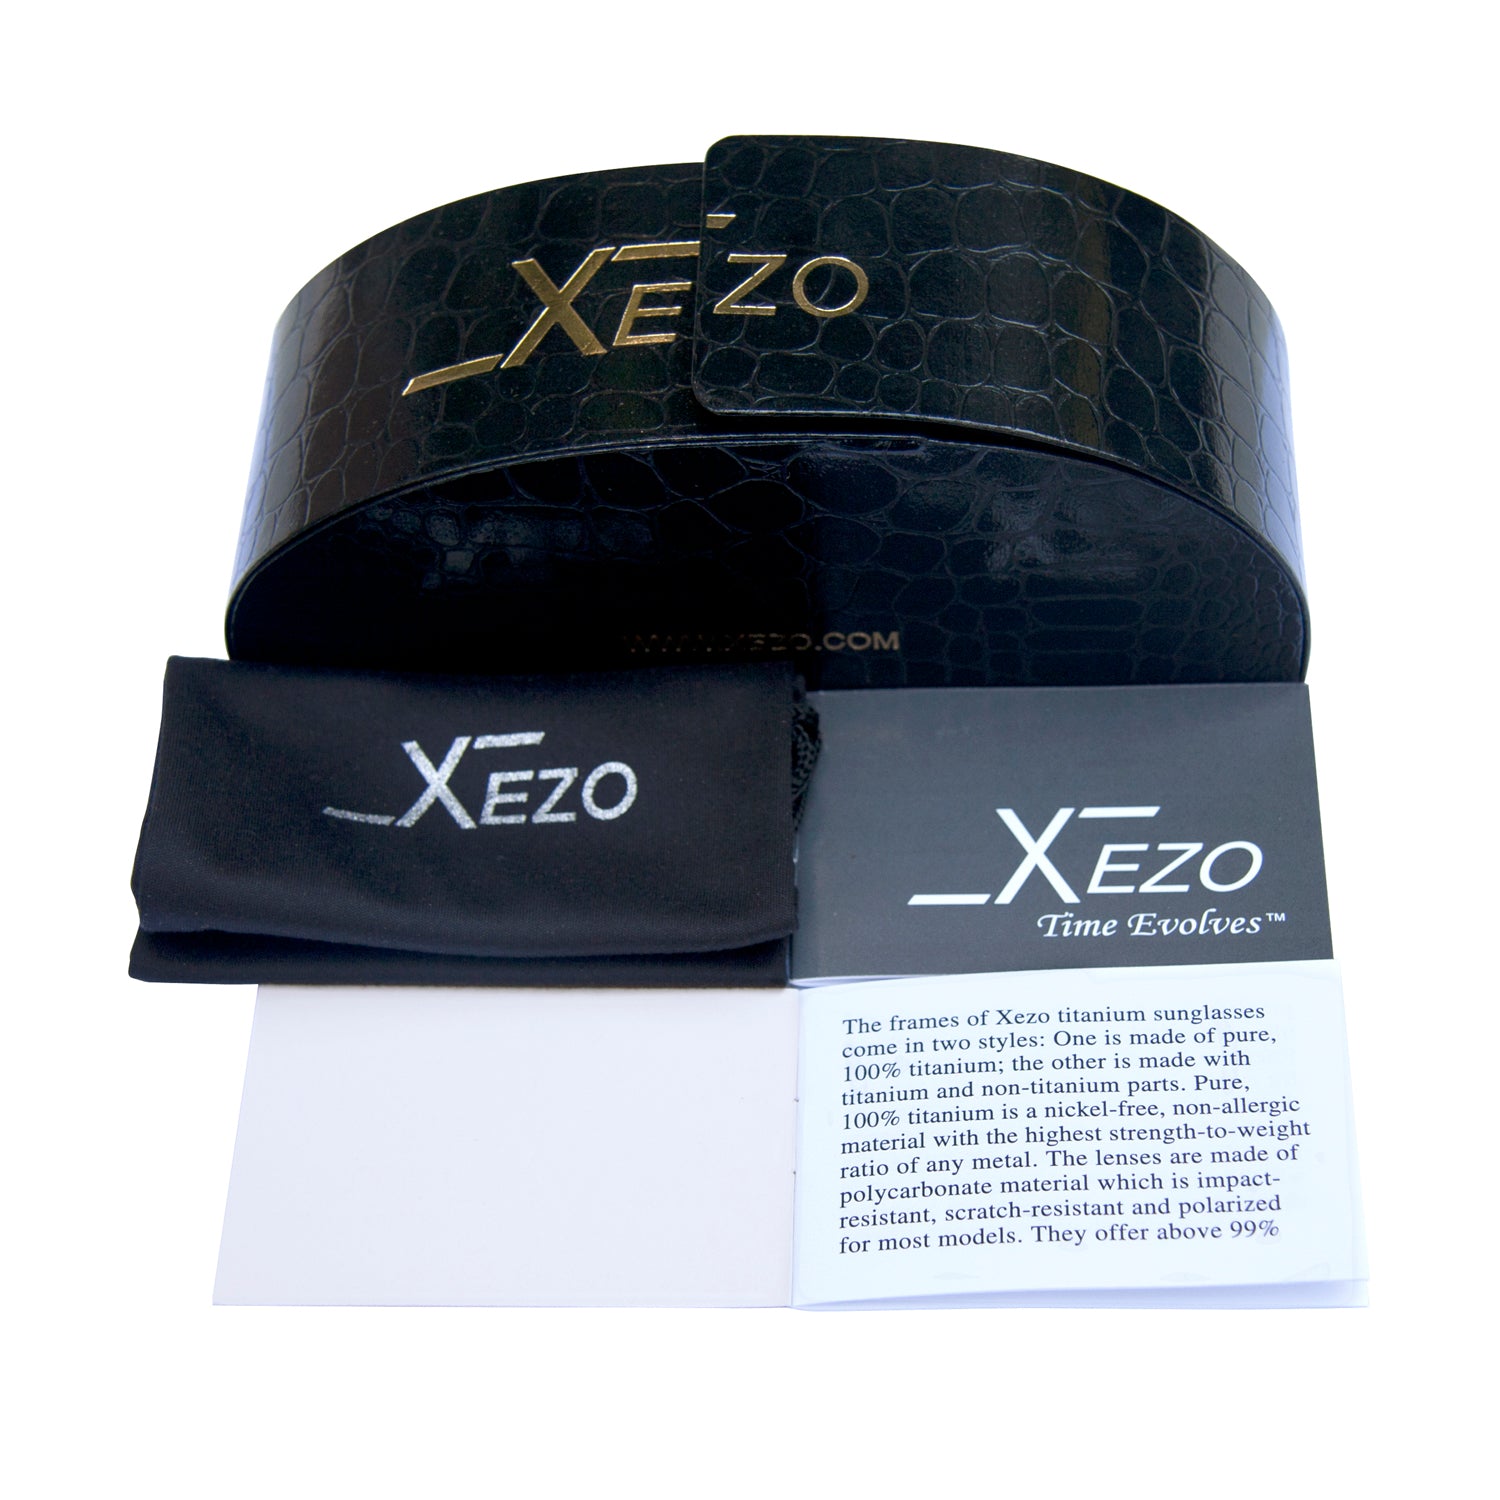 Xezo - Black gift box, black bag, and the certificate of the Architect 2950 watch